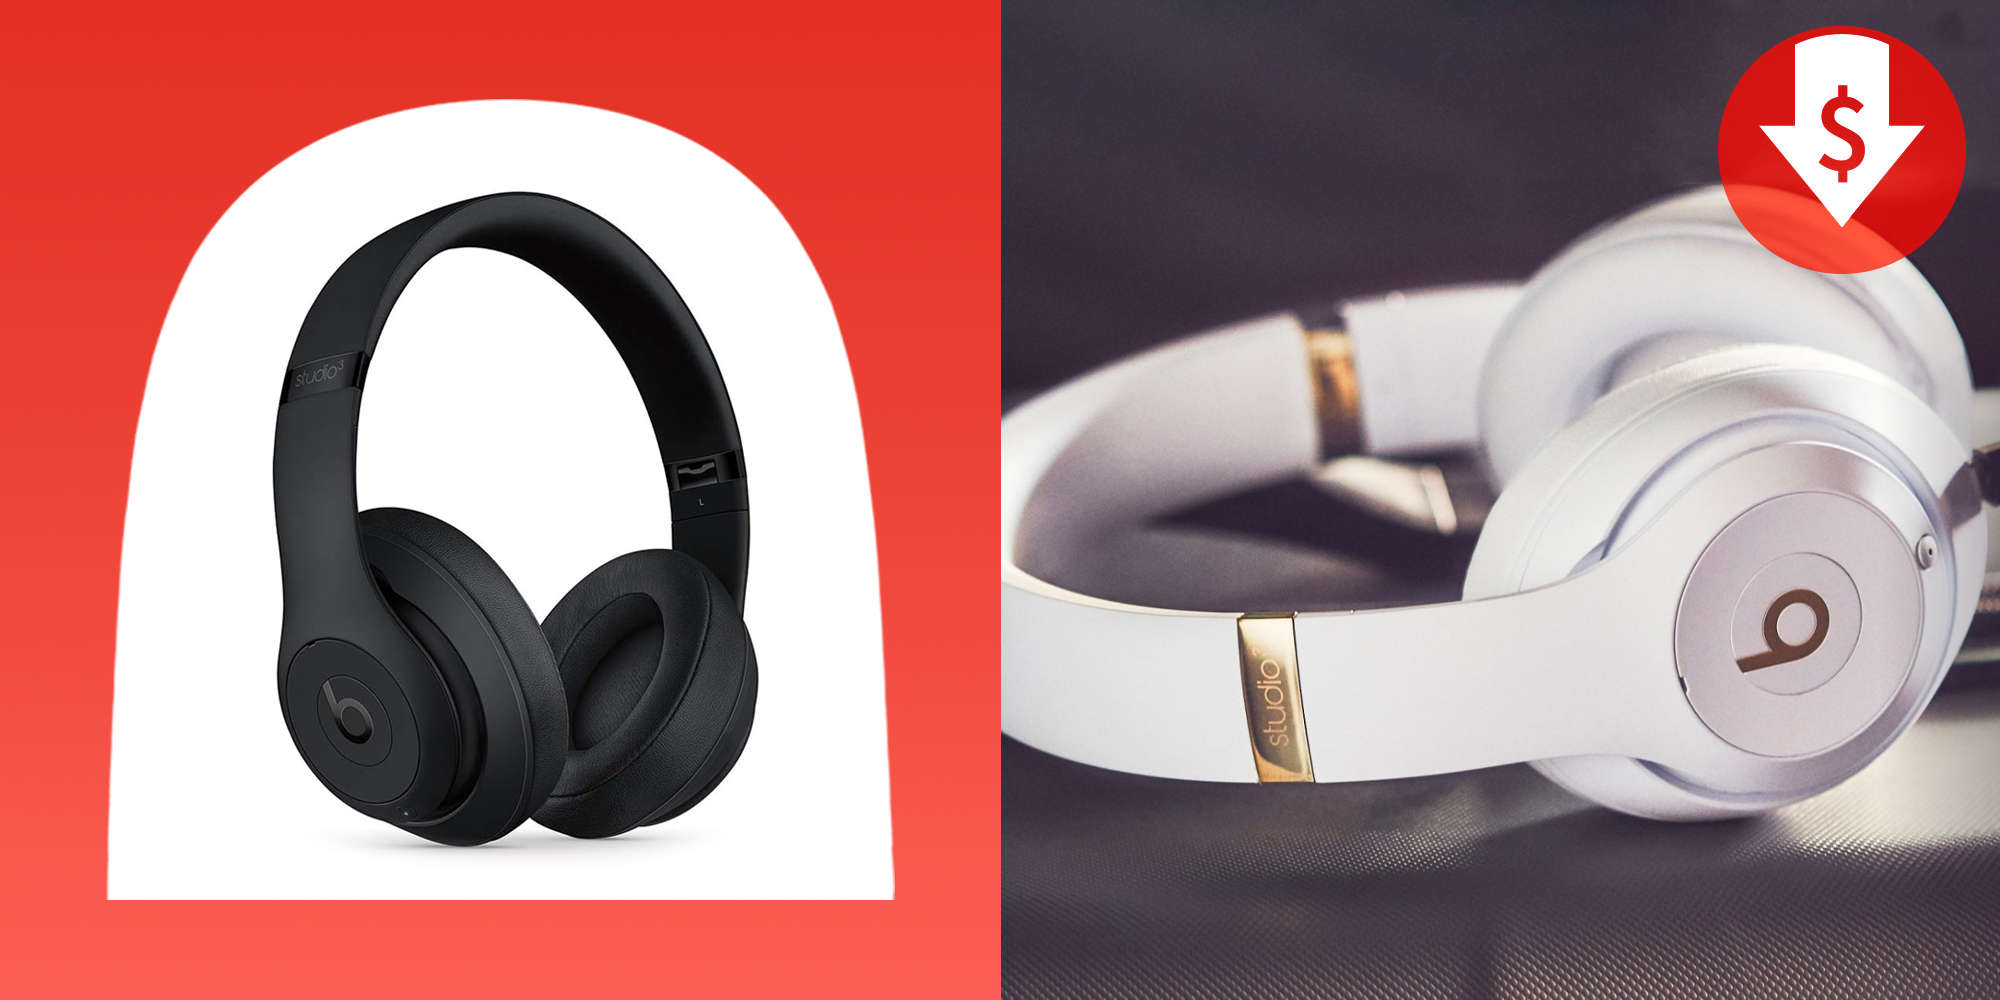 Get a New Pair of Beats Headphones for % Off on Amazon Today